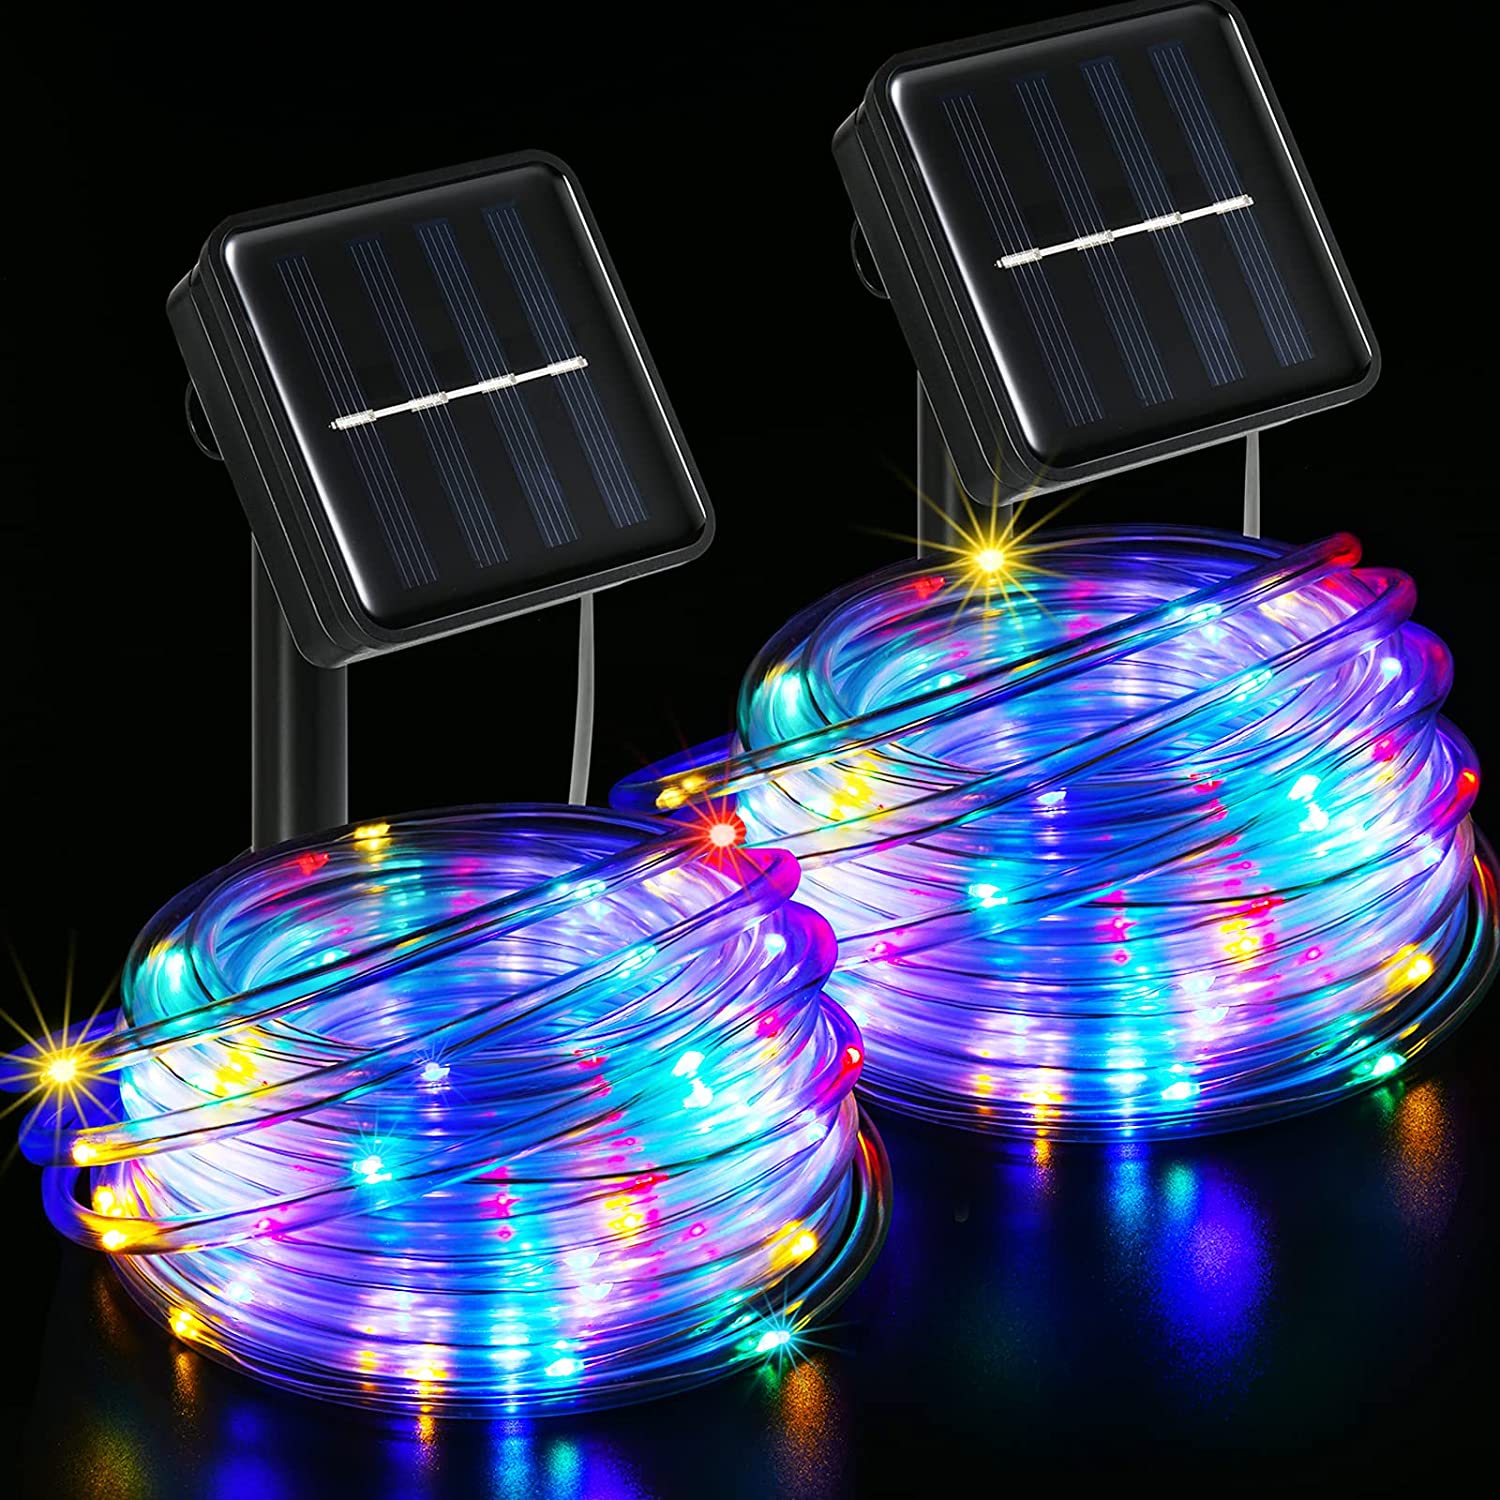 Colorful Solar Rope Lights Outdoor Waterproof, 2 Pack Each 33Ft 100 LED Christmas Lights Solar Powered 8 Modes PVC Tube Fairy String Lights Multicolor for Garden Yard Party Tree Home Christmas Decor